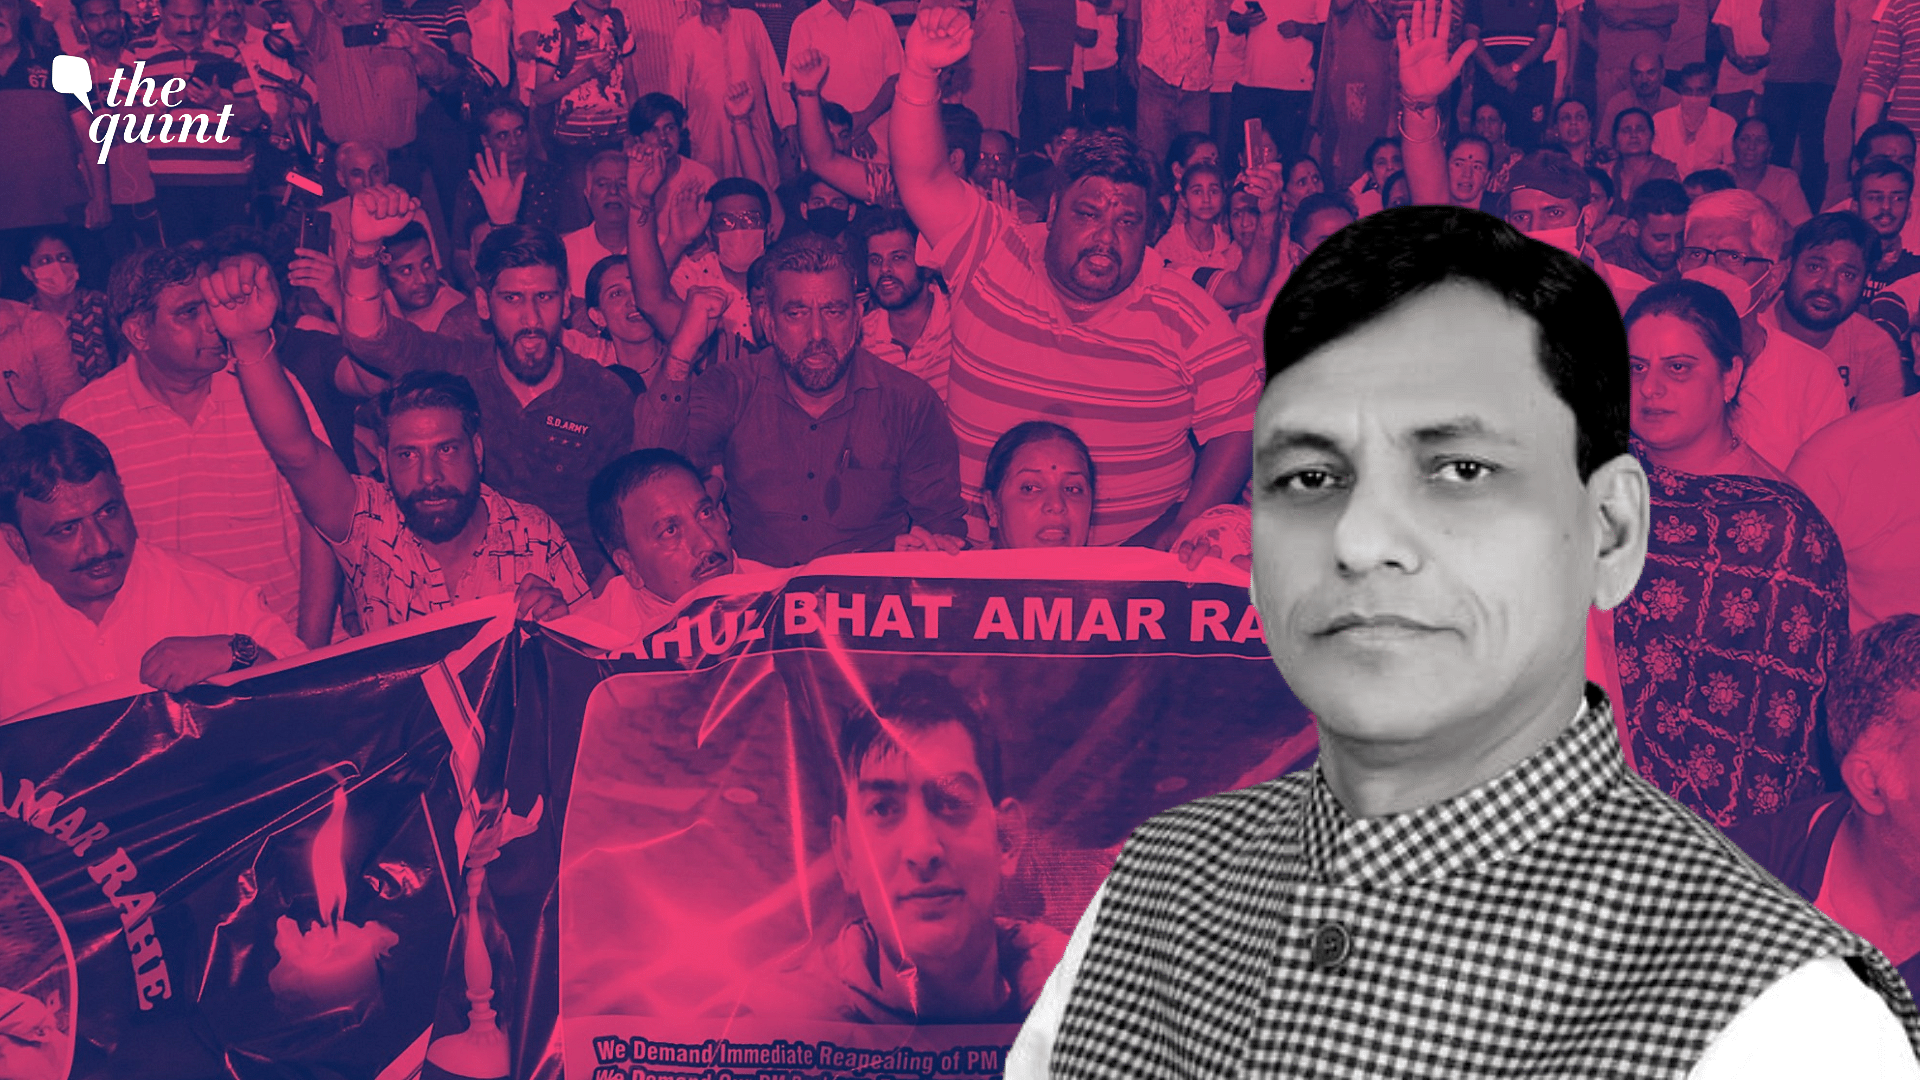 <div class="paragraphs"><p>Union Minister of State for Home Affairs Nityanand Rai, on Wednesday, 20 July, claimed that "no <a href="https://www.thequint.com/topic/kashmiri-pandits">Kashmiri Pandit</a> has reportedly migrated from the valley" between 5 August 2019 to 20 July 2022.</p></div>